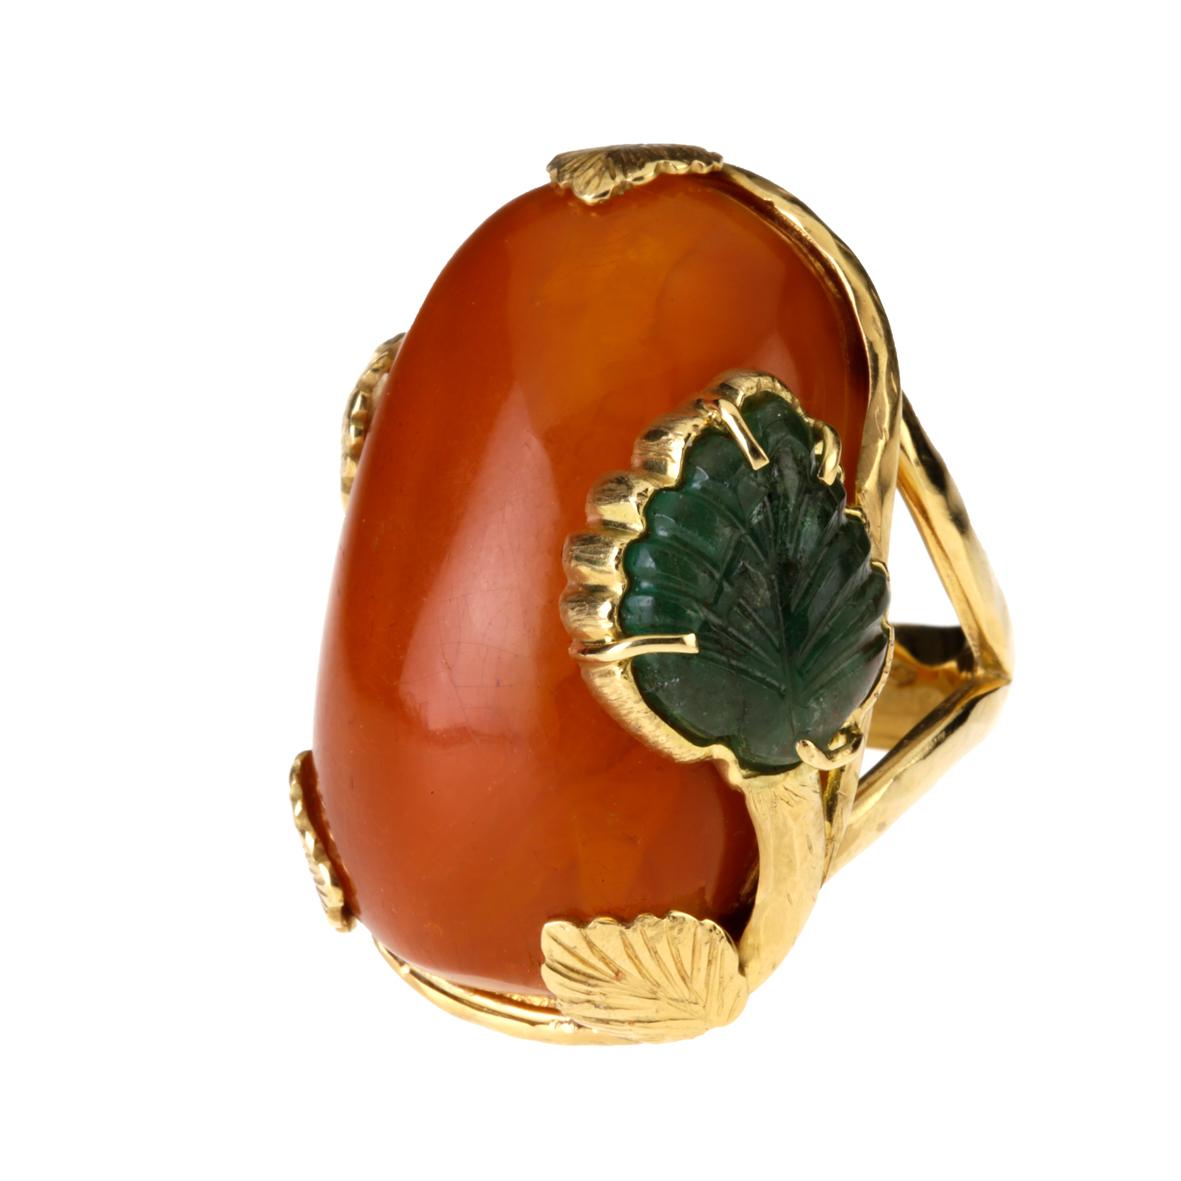  Cabochon butterscotch amber ring, with emerald carved leaf on the side, carved yellow gold with leaf motif, very unique pieces gold gr.15,60 measure 15eu.
All Giulia Colussi jewelry is new and has never been previously owned or worn. Each item will